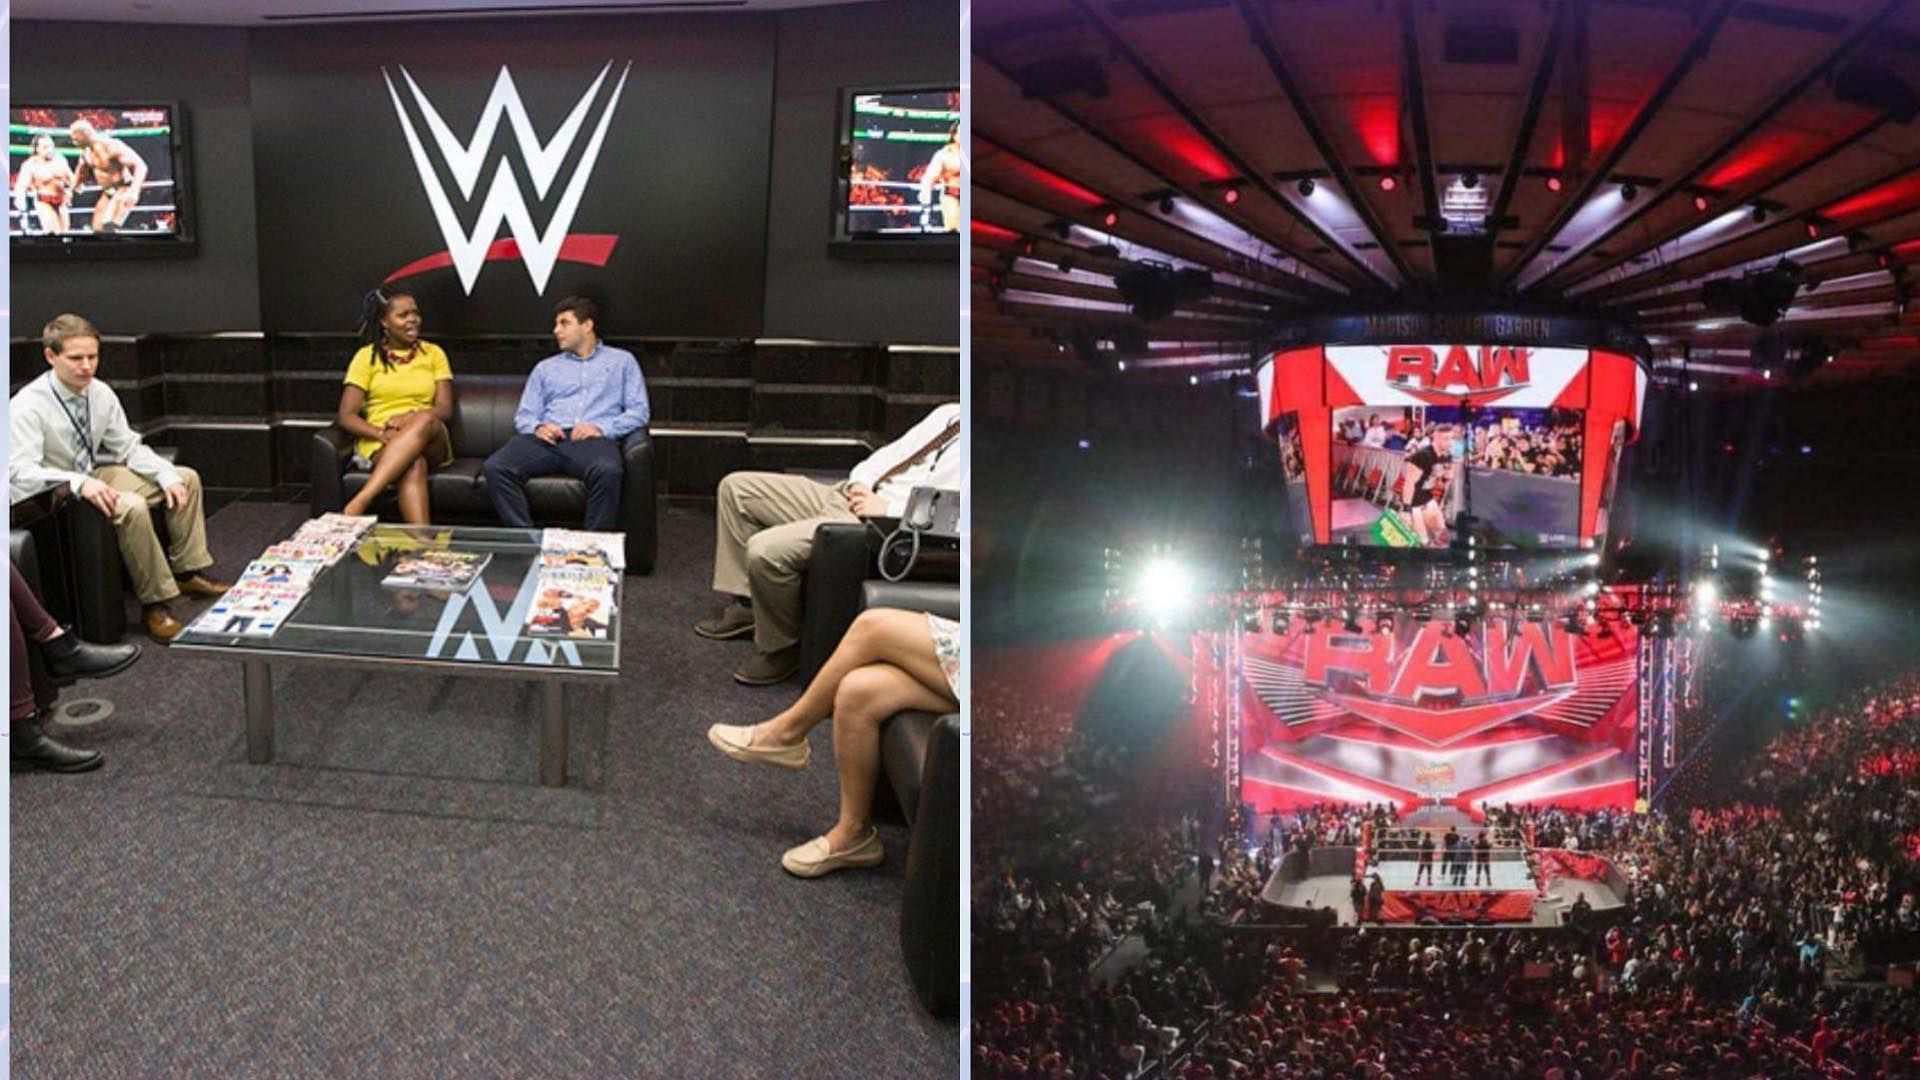 WWE RAW this week was live from the SAP Center in San Jose, California